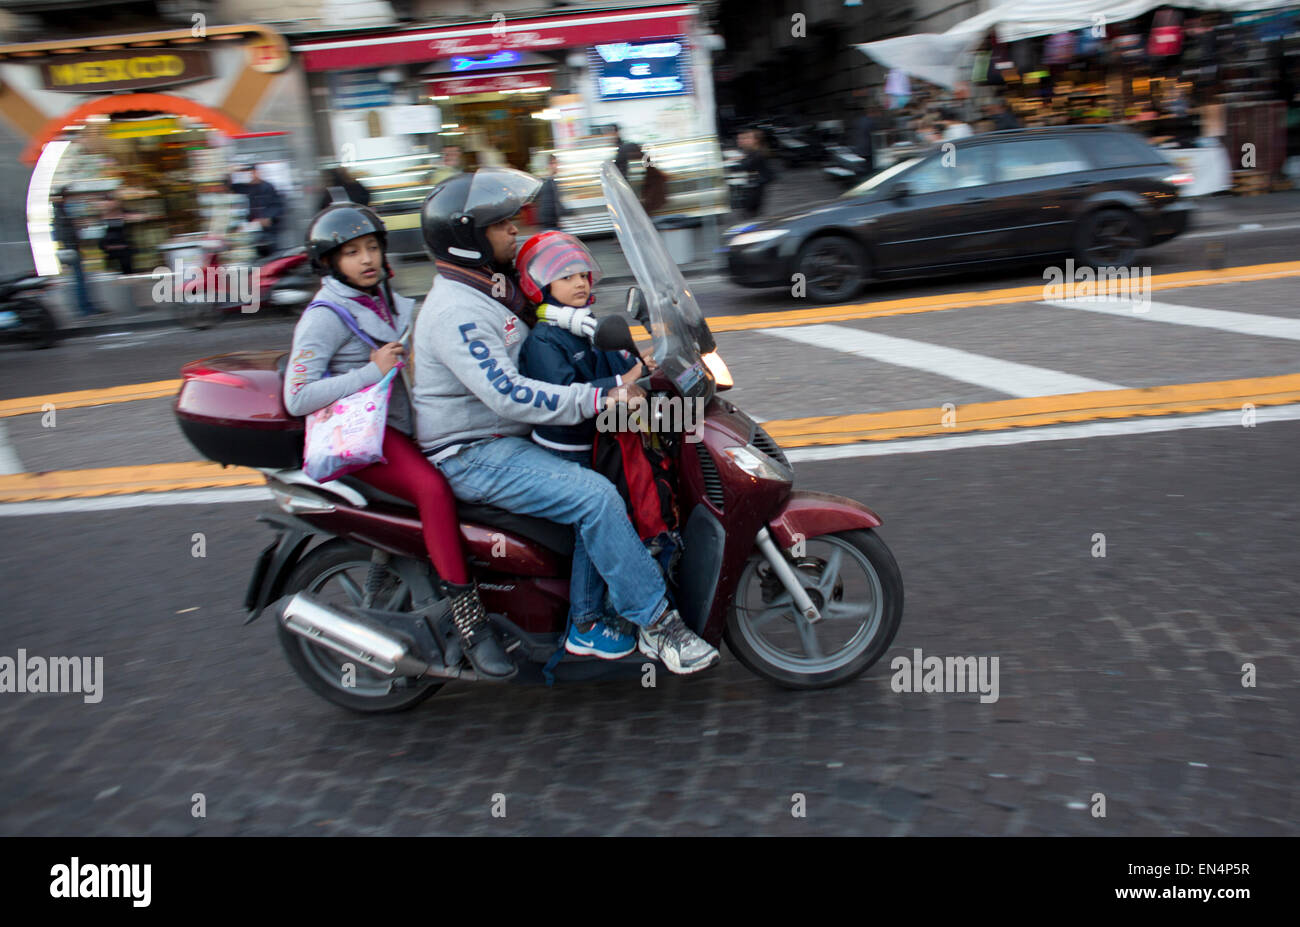 Scooters are the main mode of transport in Napels Stock Photo